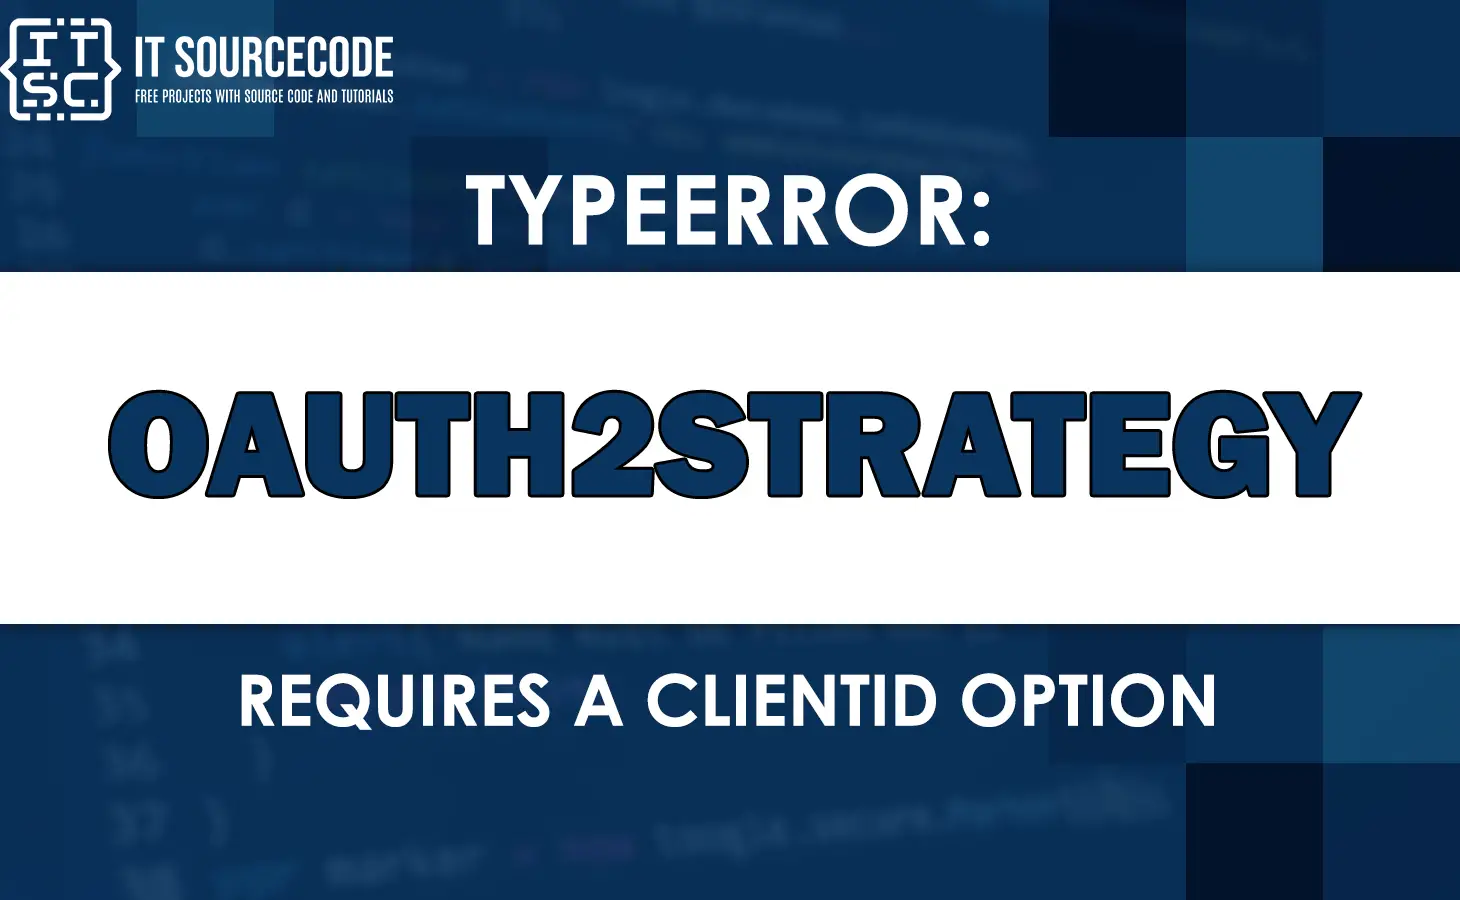 Typeerror: oauth2strategy requires a clientid option